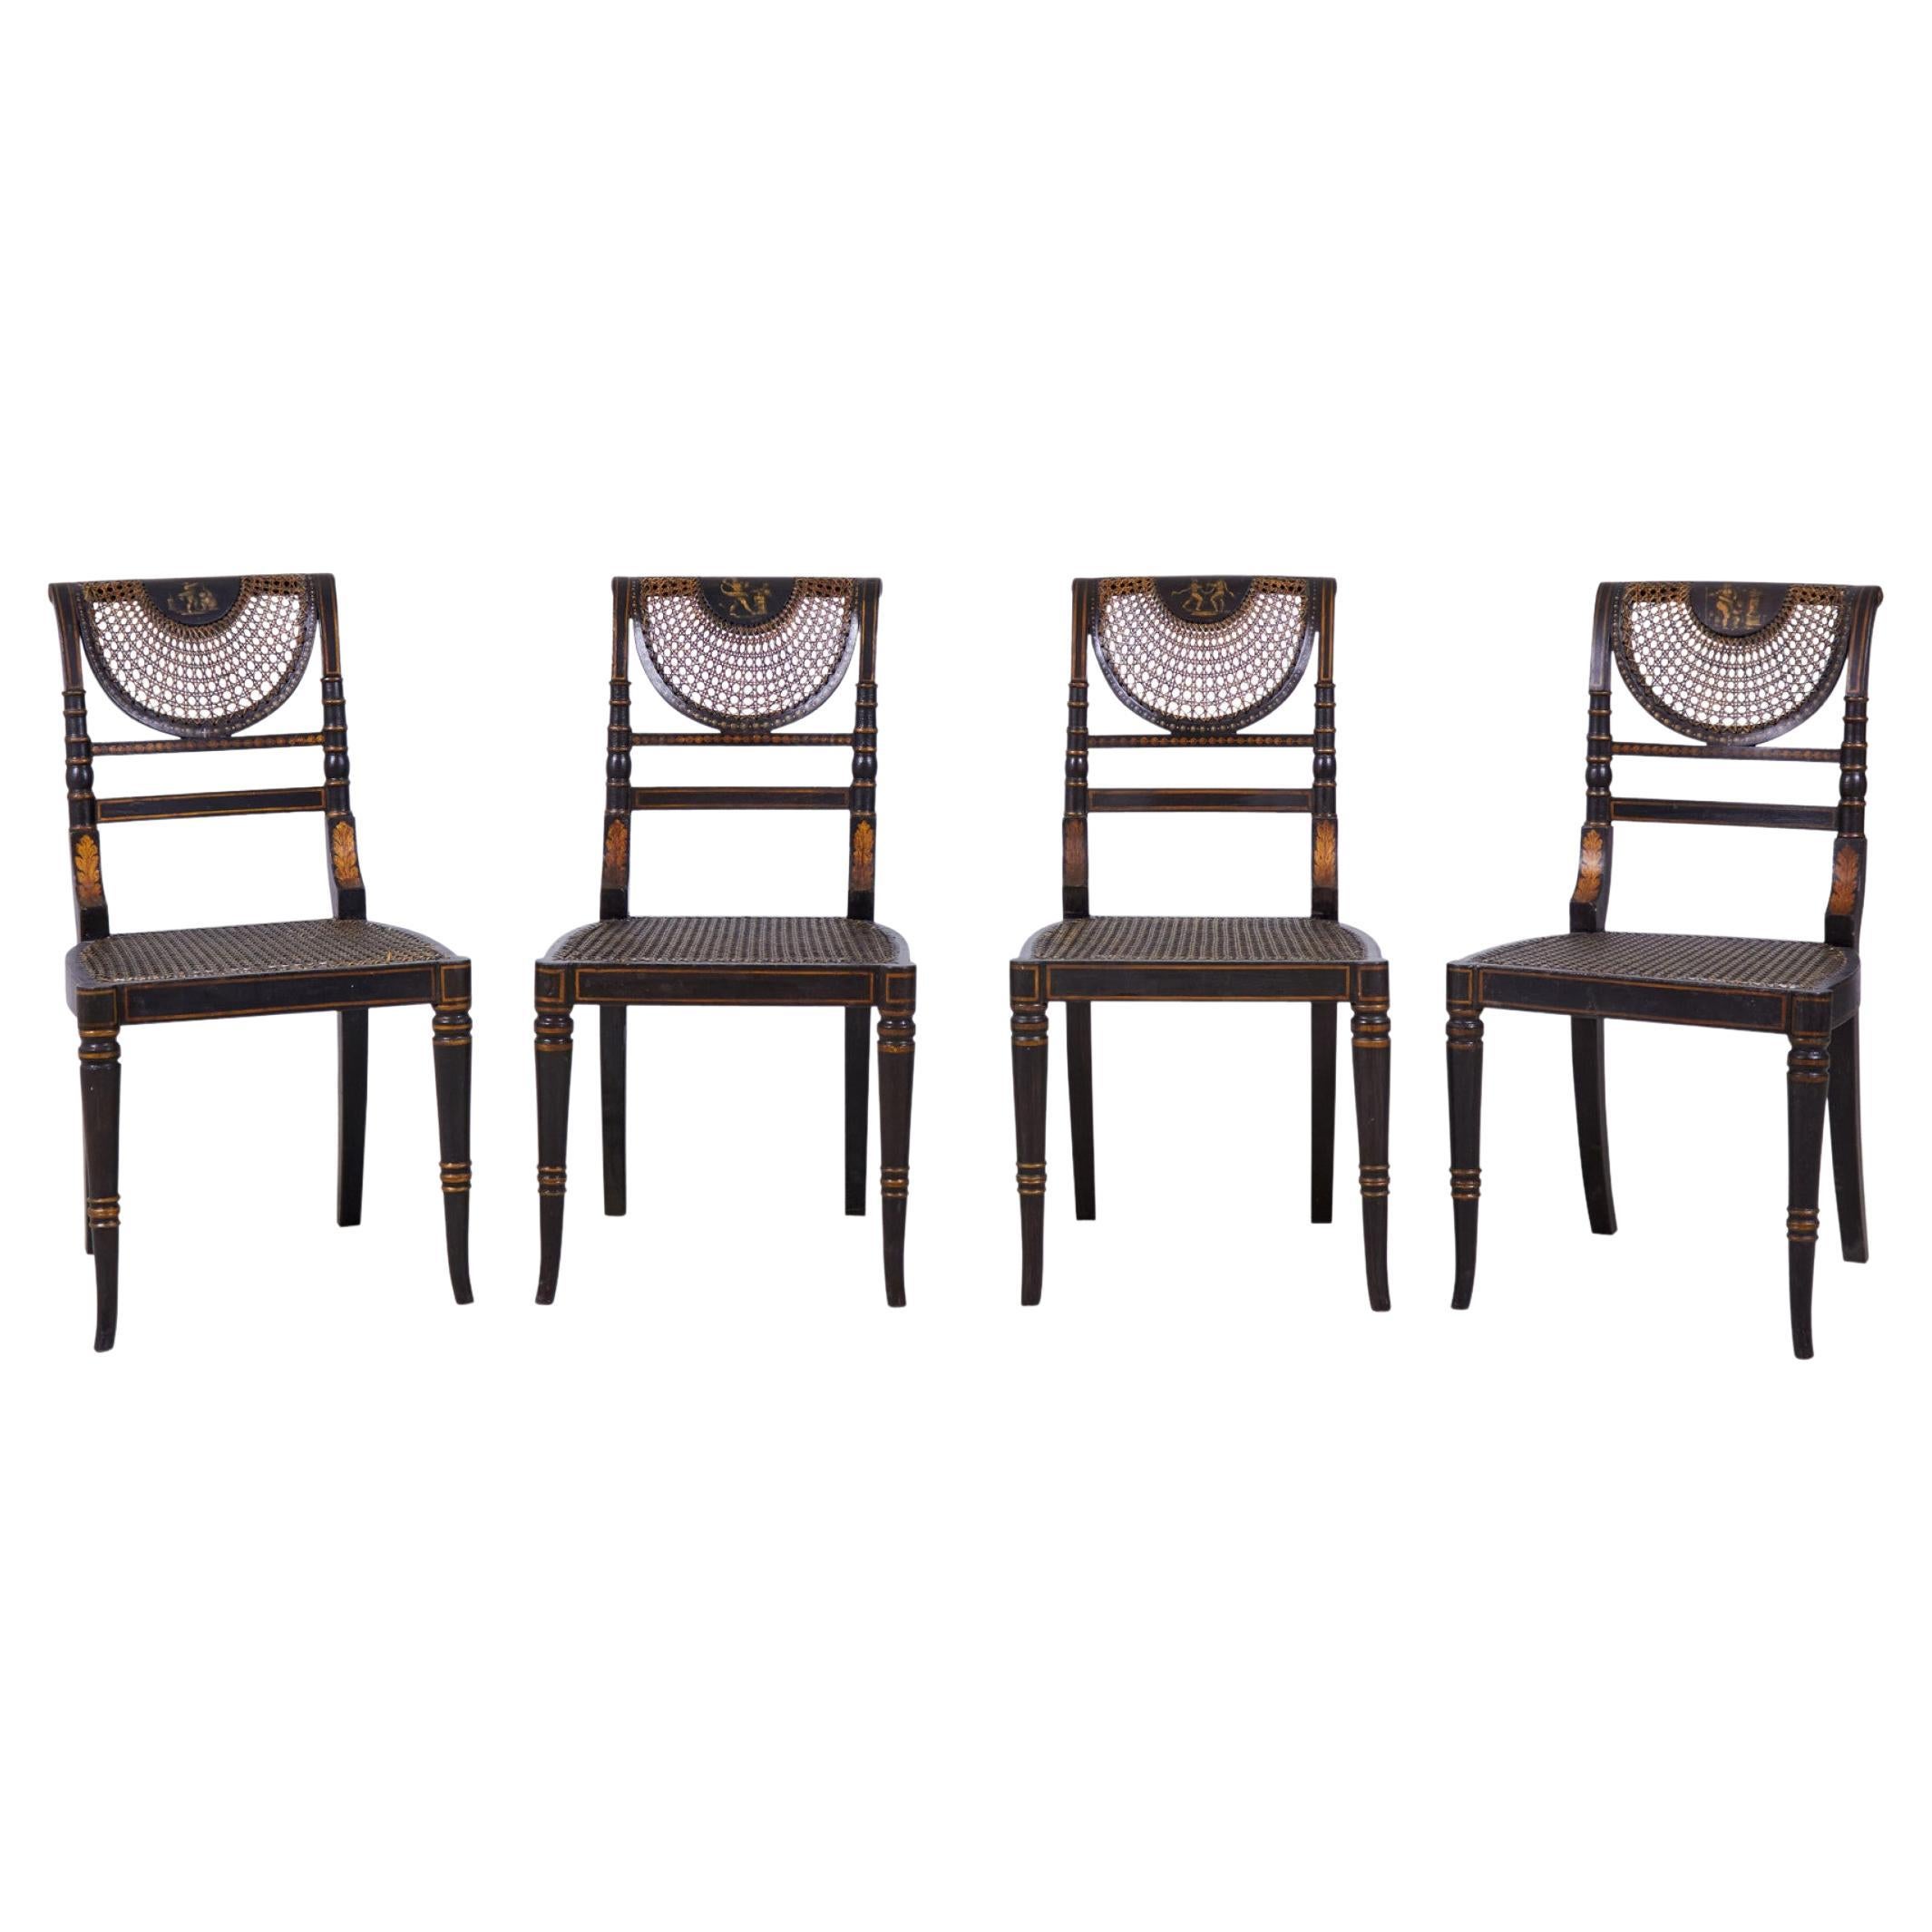 Set of 4 English Regency Black and Gold Painted Cane Seat Side Chairs For Sale